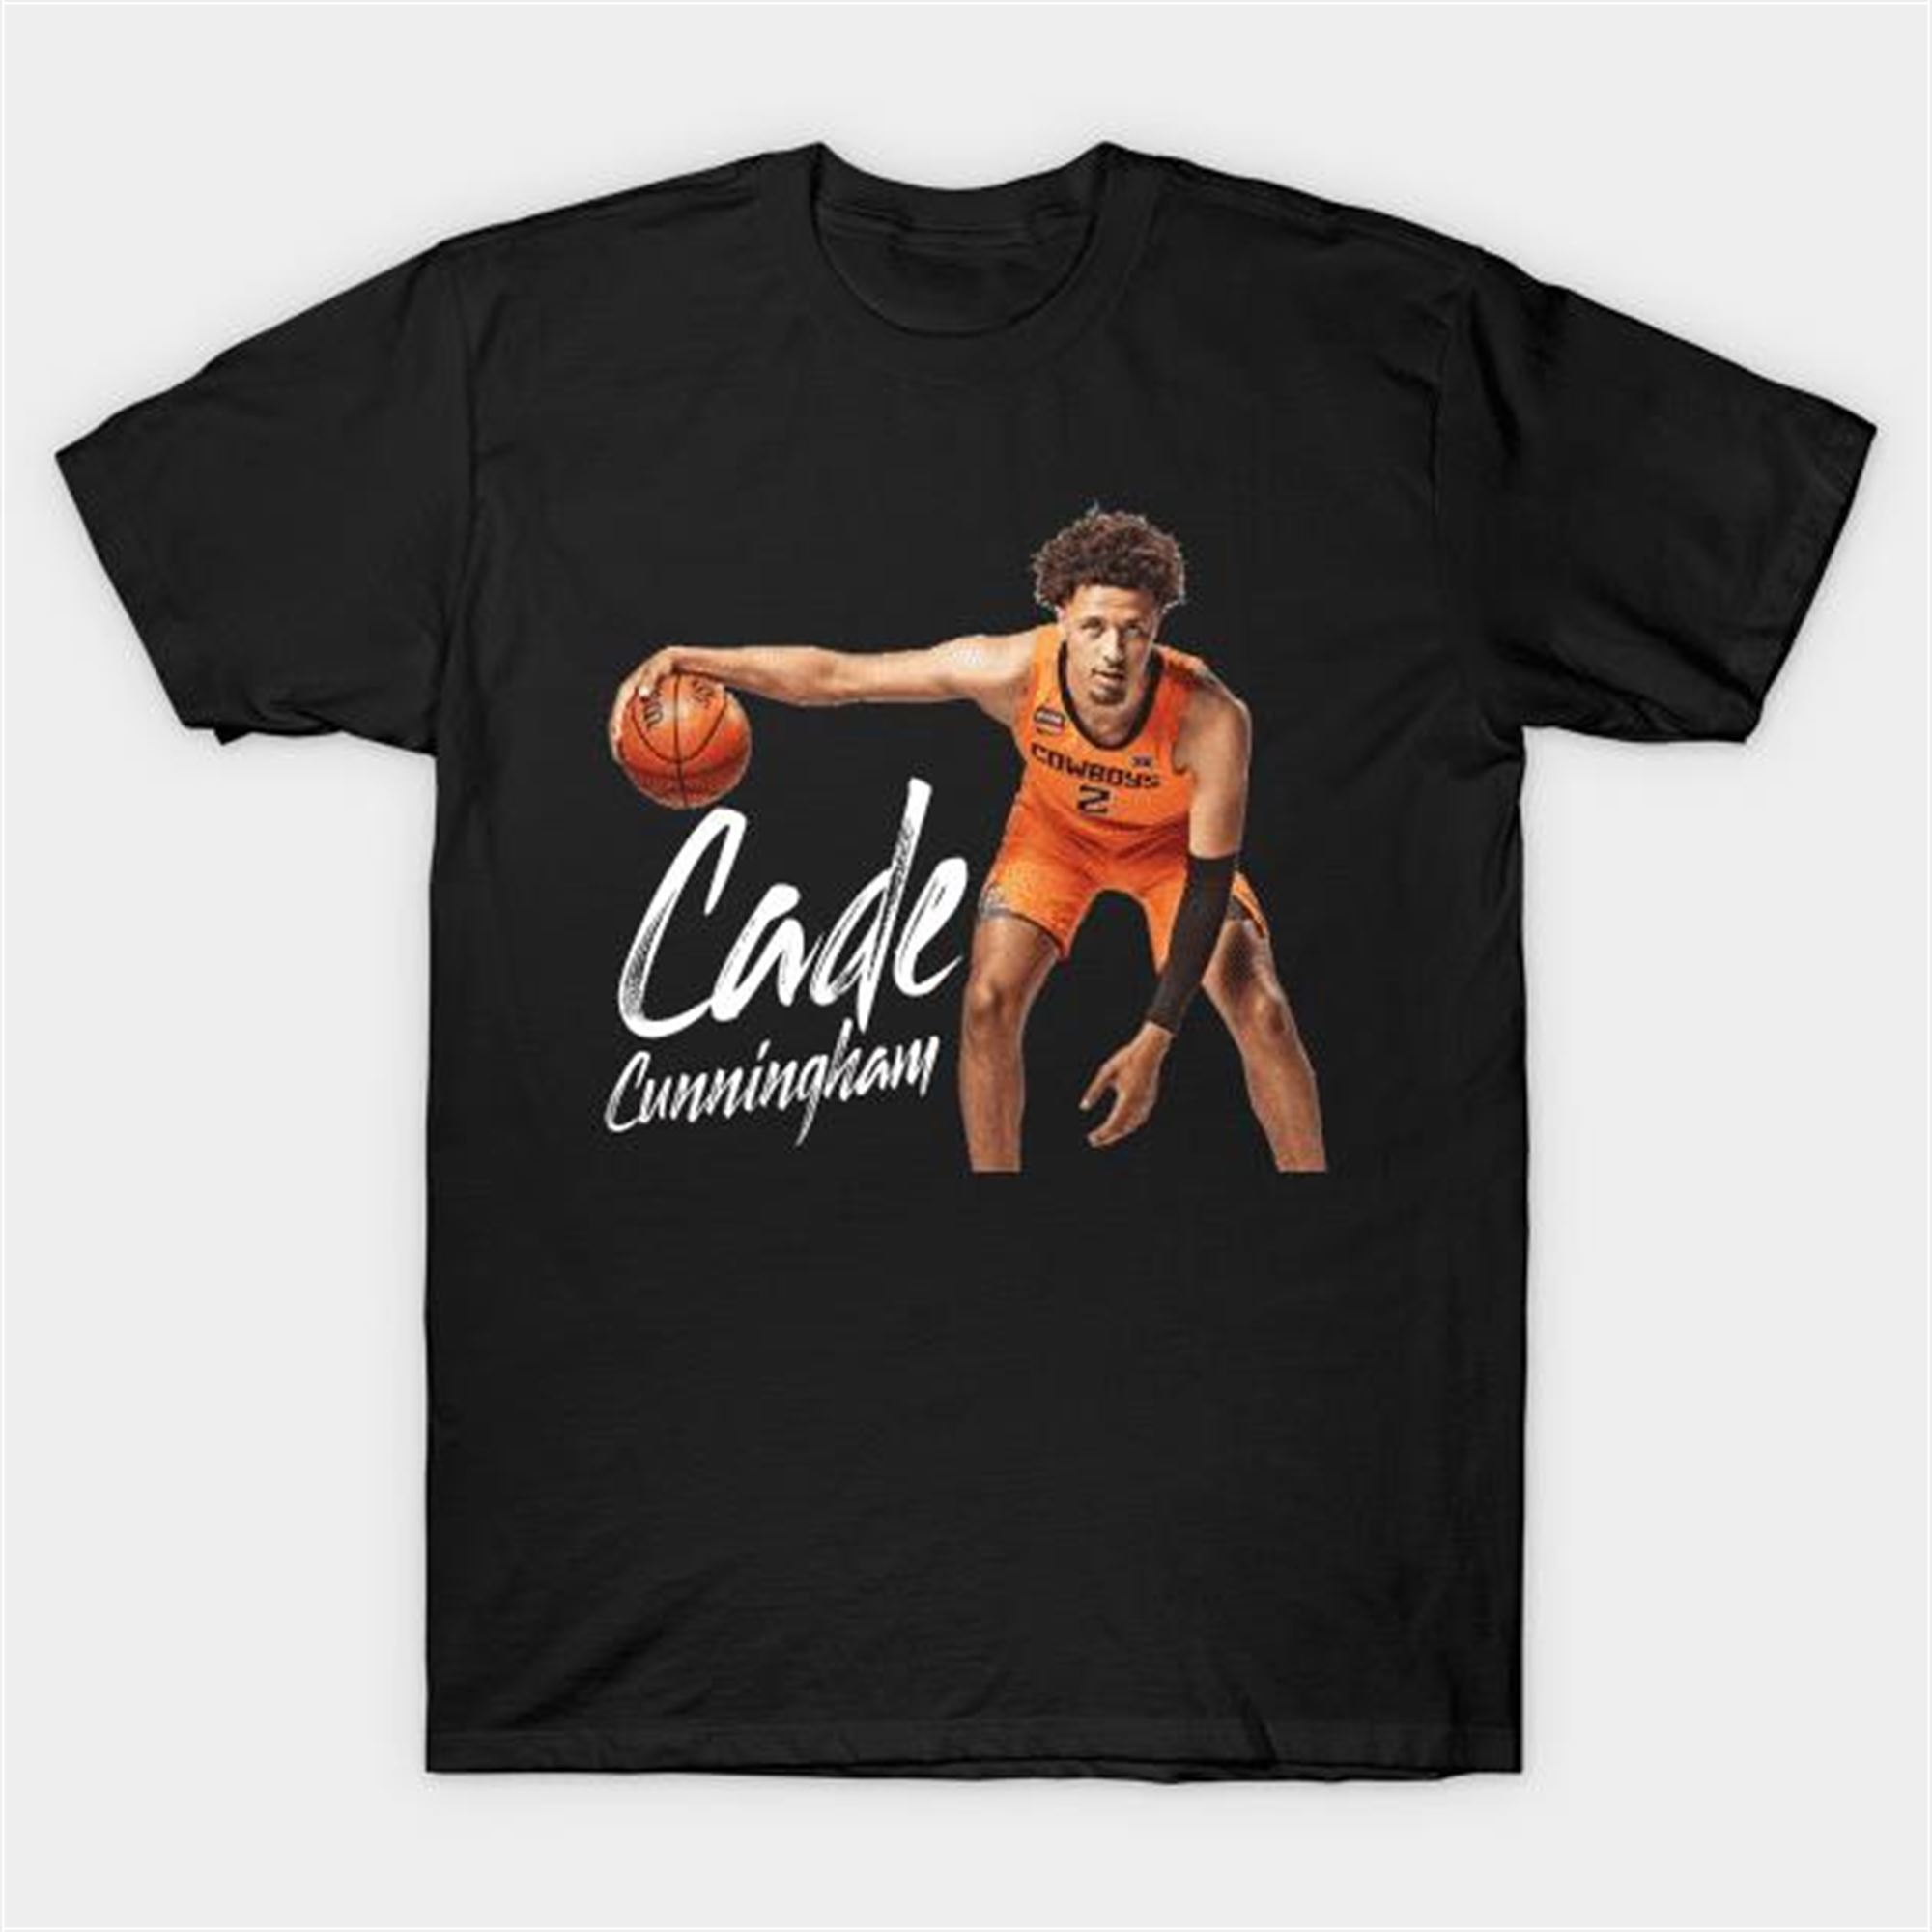 Nba Draft 2021 Number One Pick Cade Cunningham T Shirt Full Size Up To 5xl